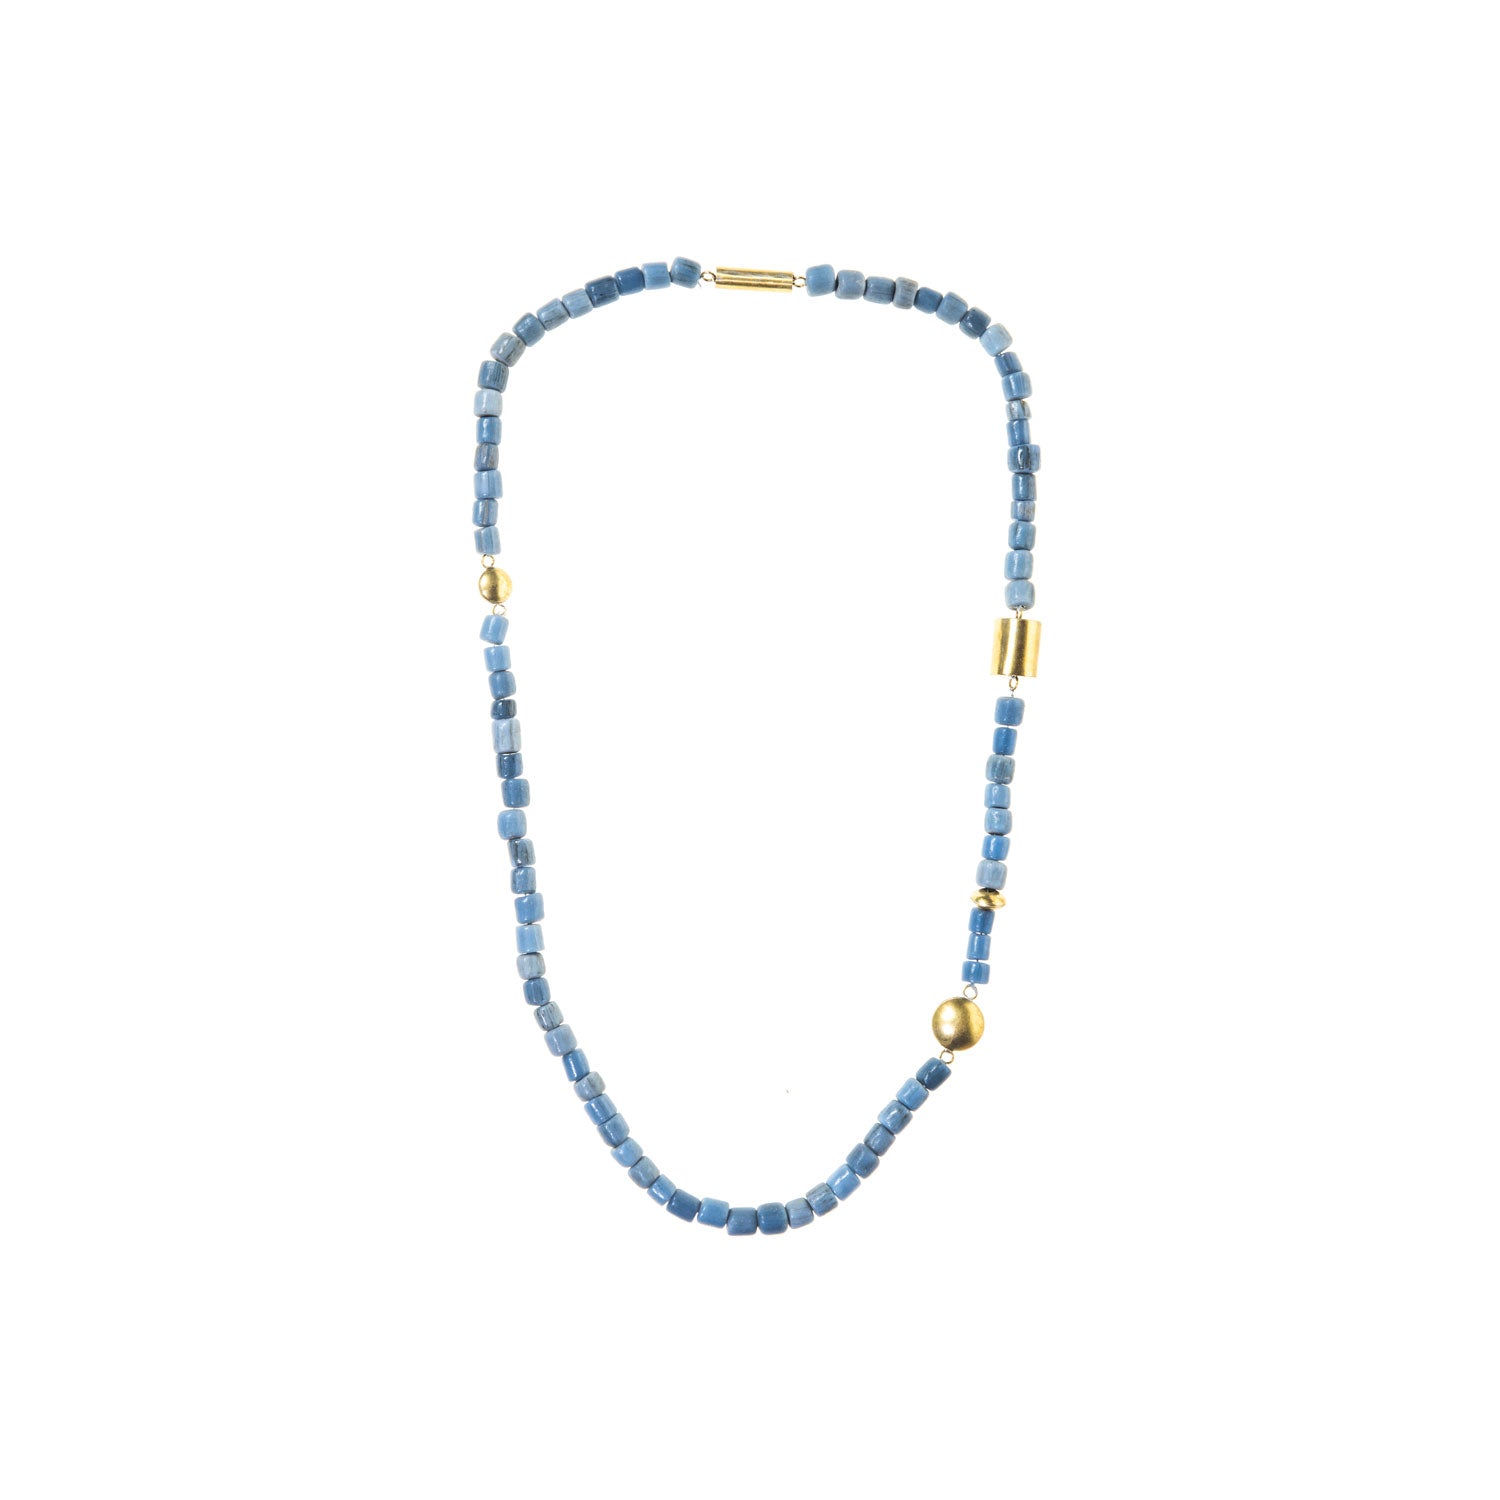 Just Trade - River Necklace in Blue